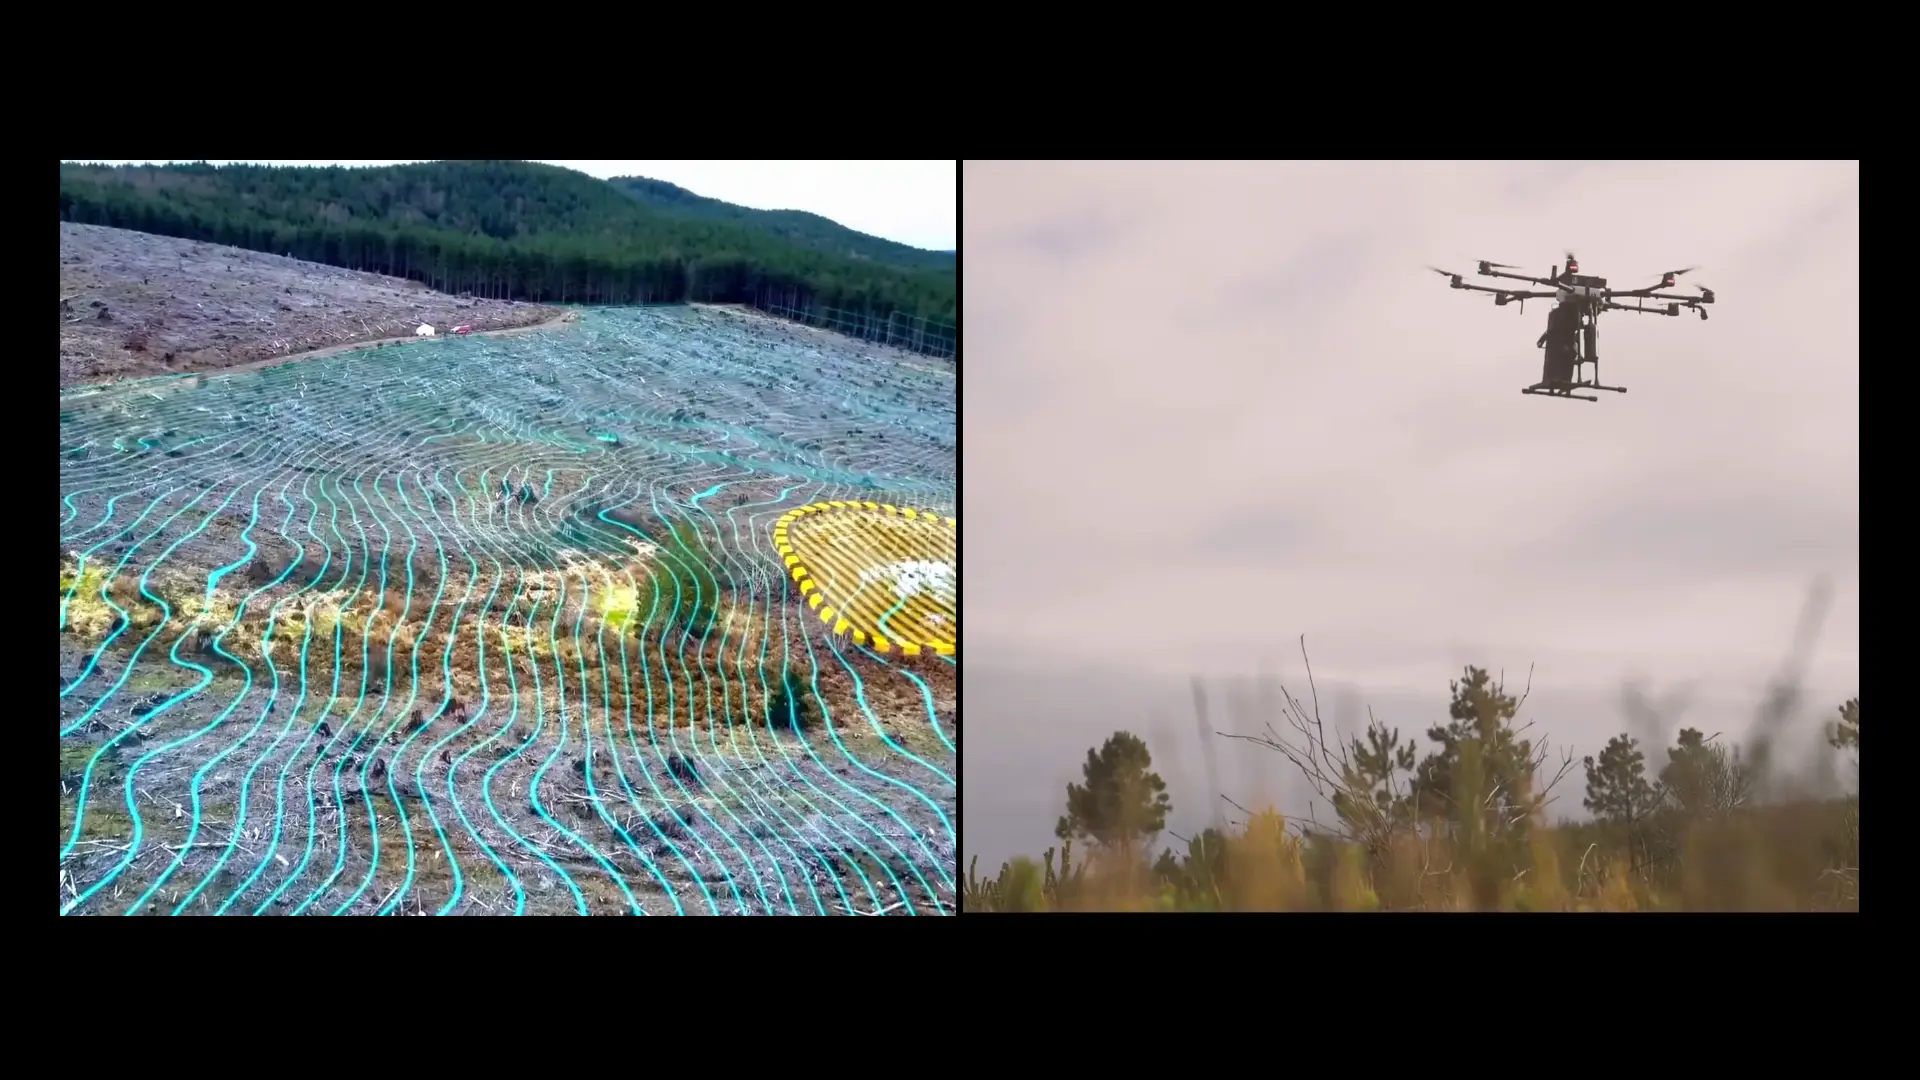 Split screen video still with image of a landscape with overlaid contour lines on left, and medium view of drone helicopter in a field on right.